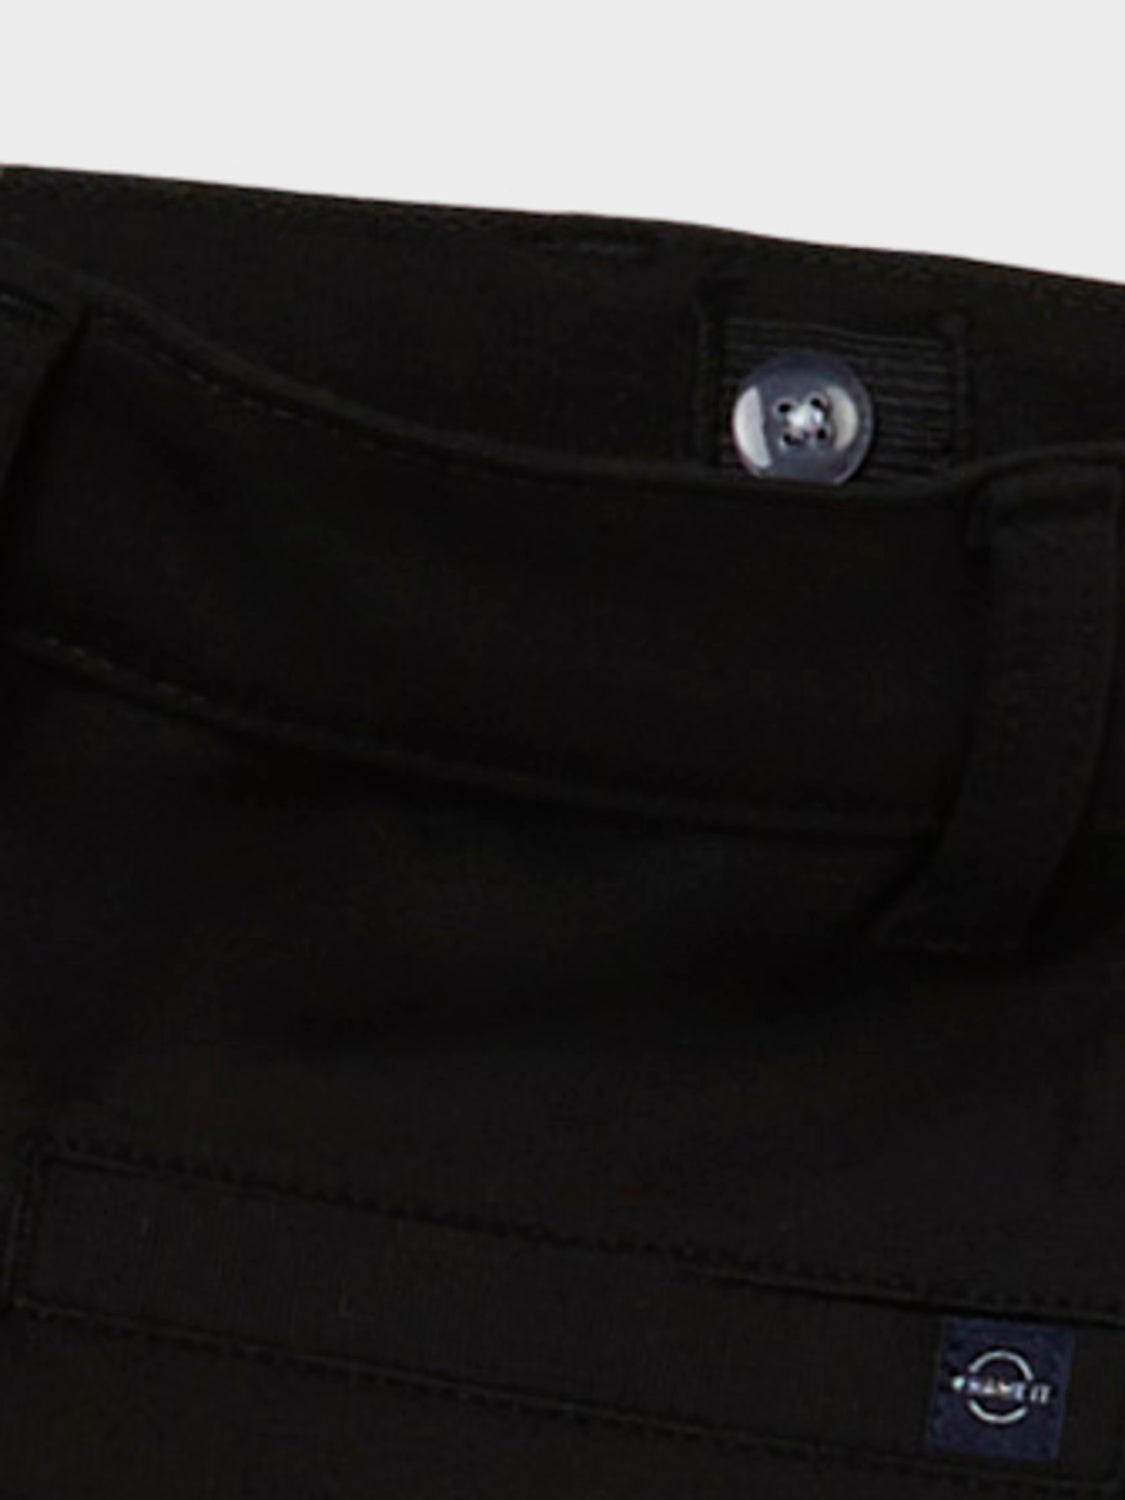 NMMSILAS Trousers - Black